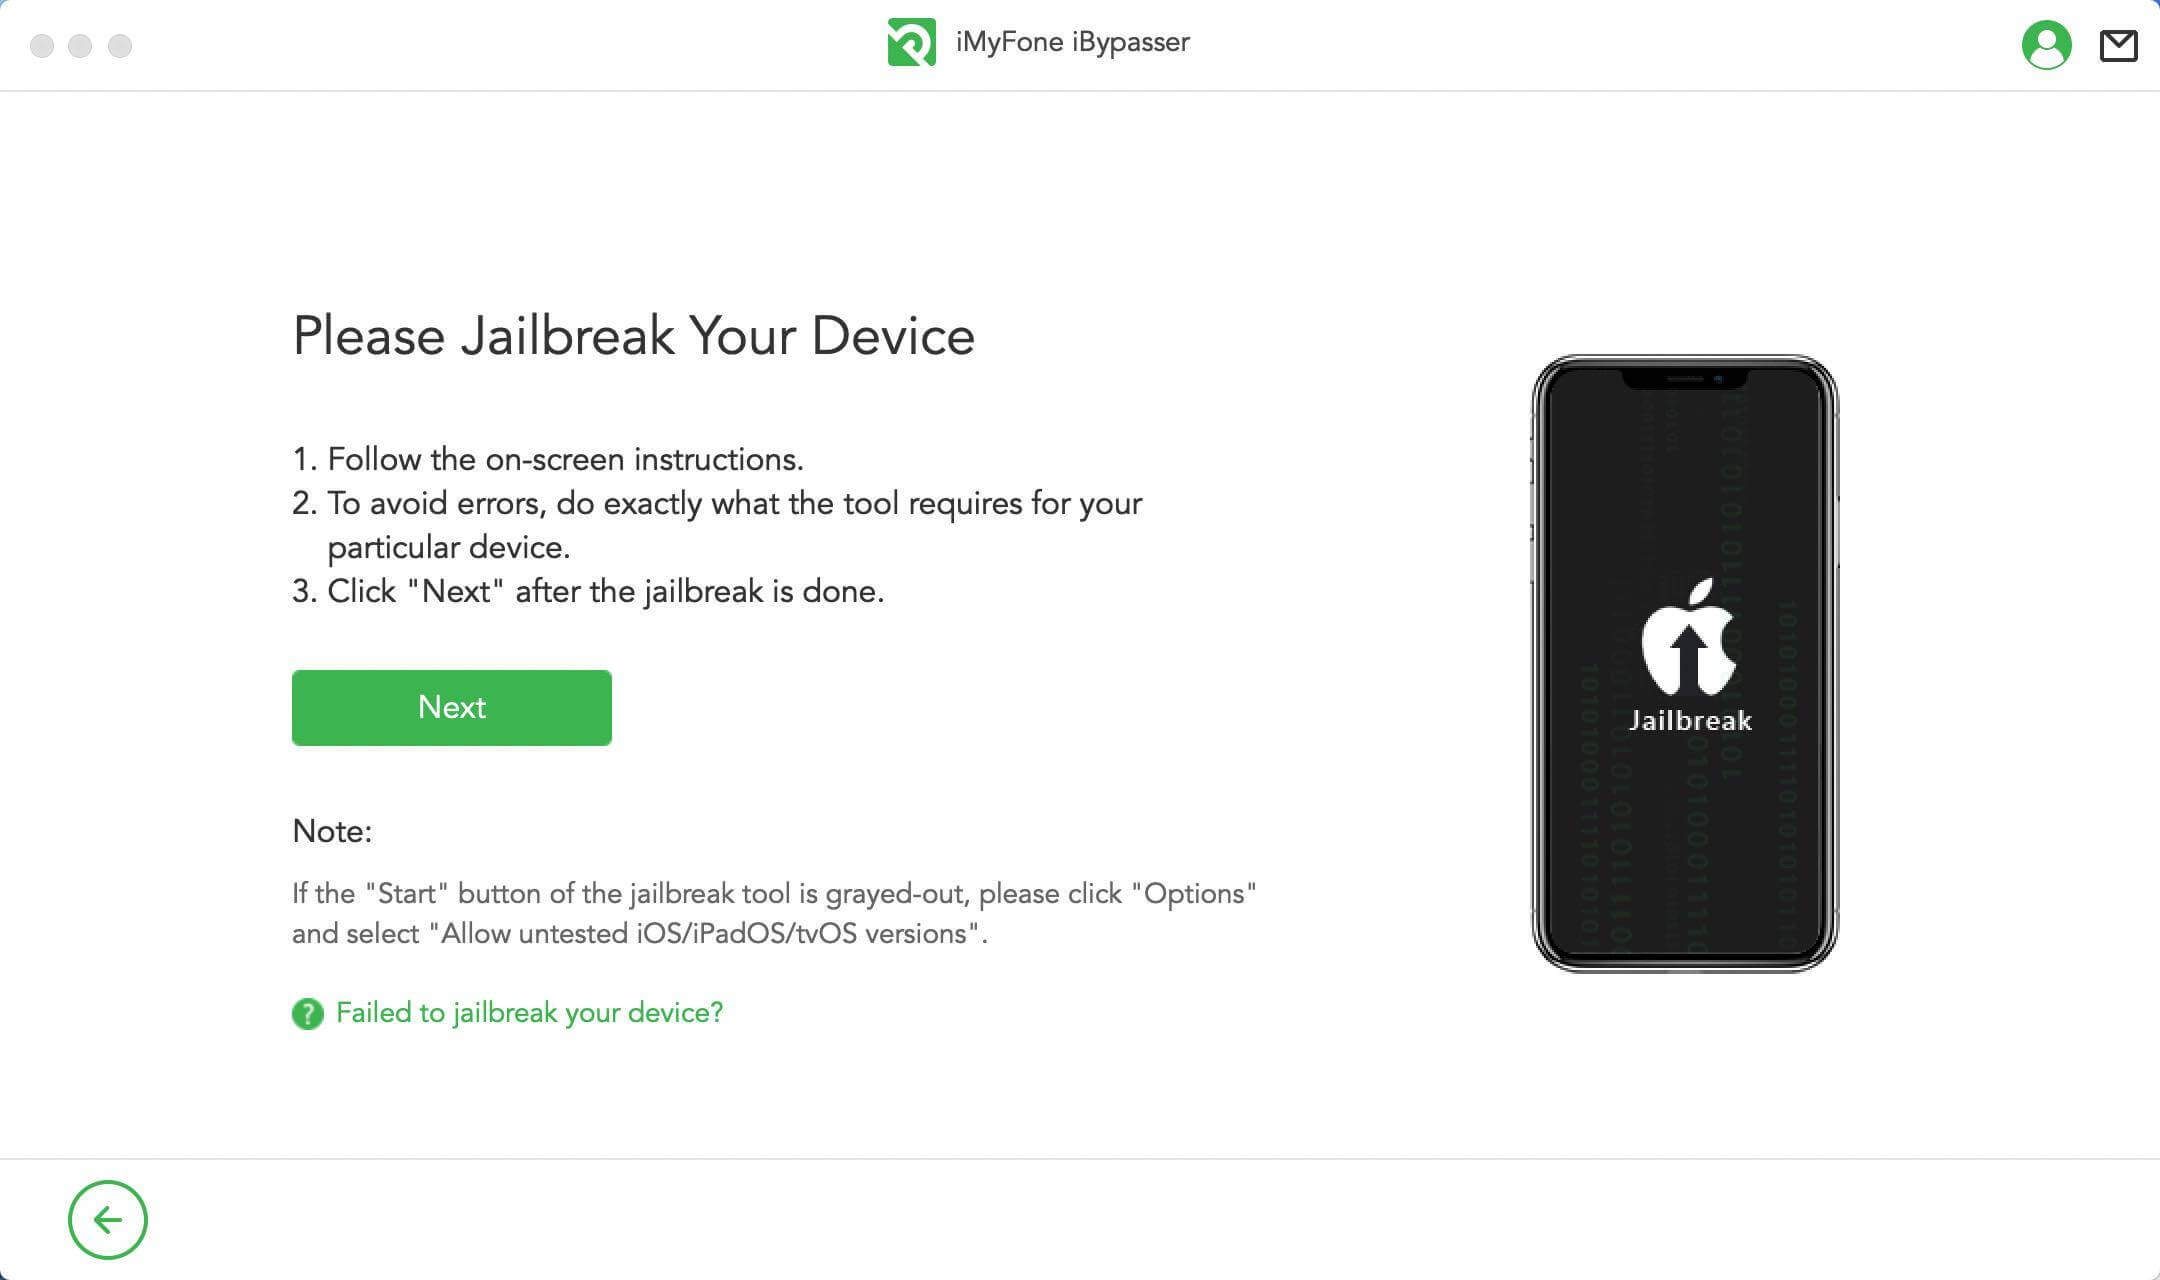 jailbreak your device by ibypasser